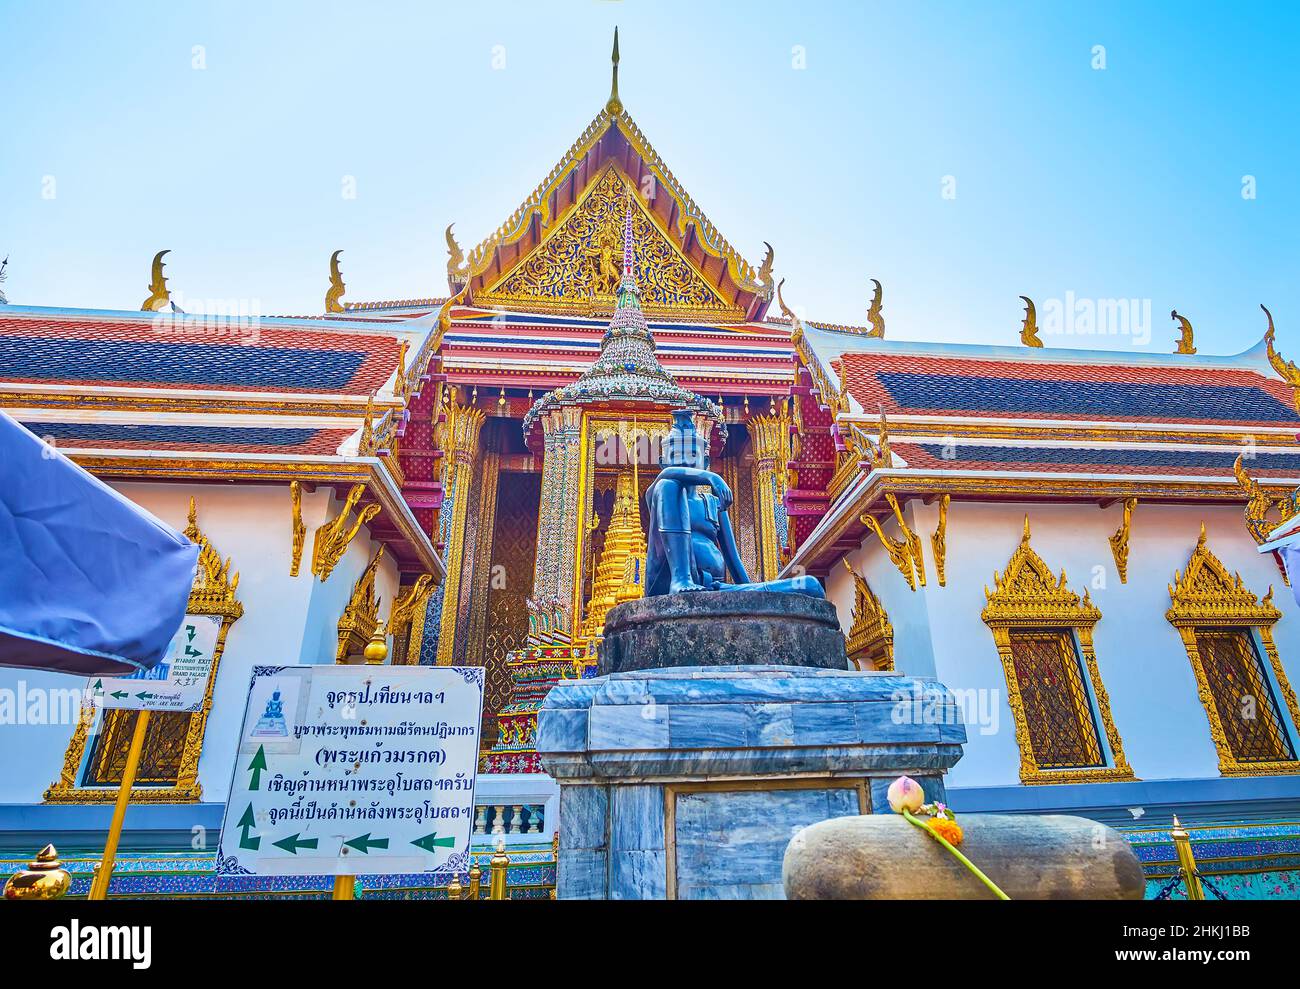 BANGKOK, THAILAND - MAY 12, 2019: The colorful facade of the side wall of Phra Ubosot shrine with sculpture of sitting Buddha, on May 12 in Bangkok Stock Photo